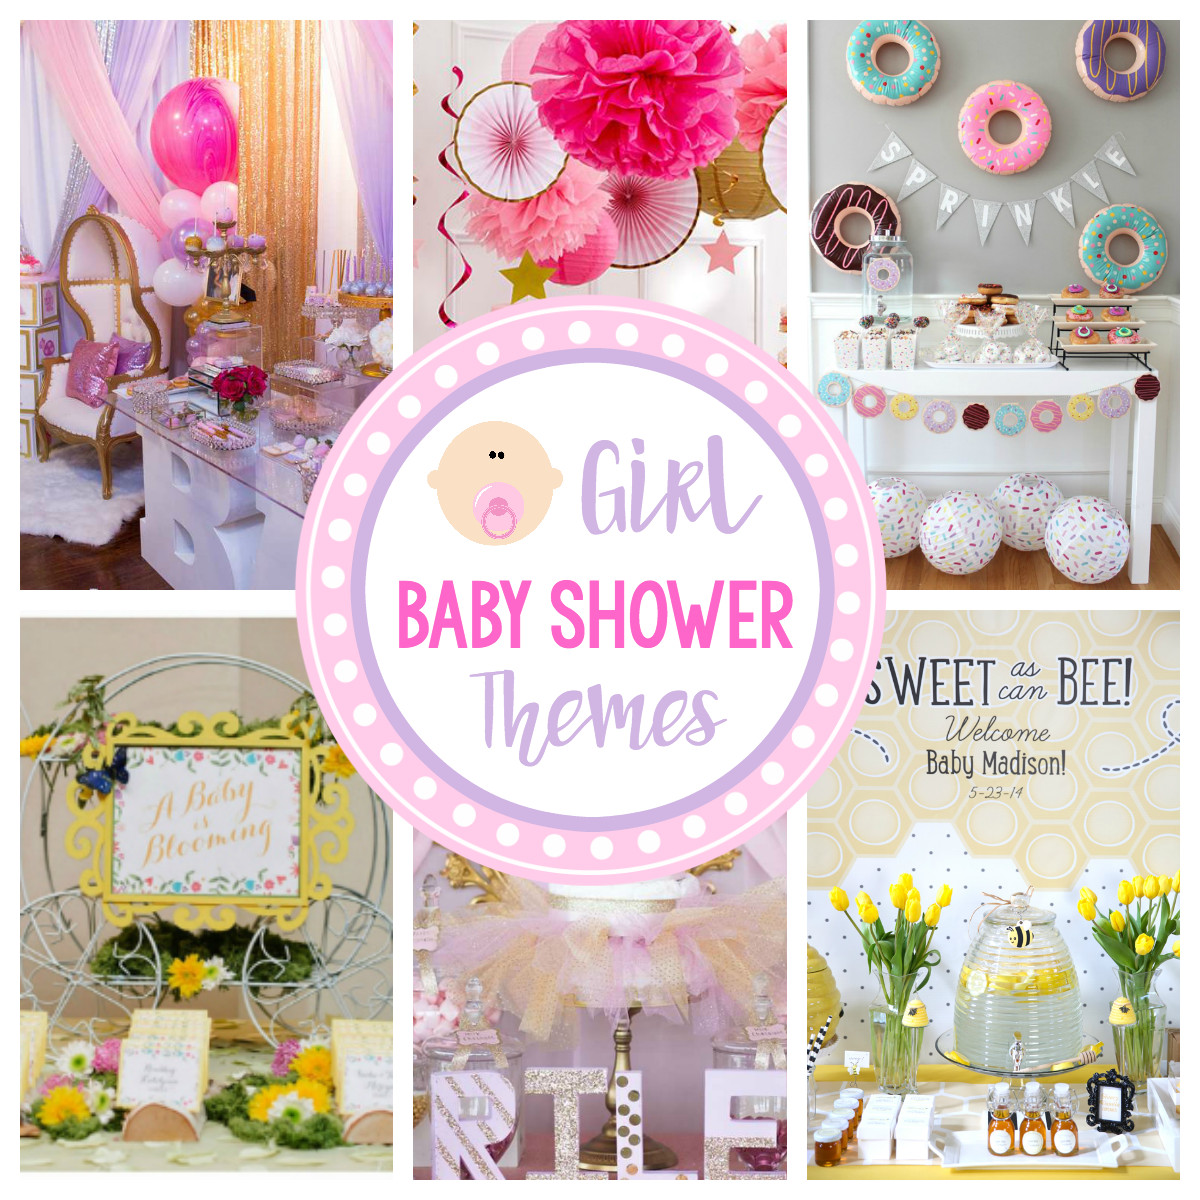 Baby Shower Decor Ideas For Girls
 Cute Girl Baby Shower Themes & Ideas – Fun Squared